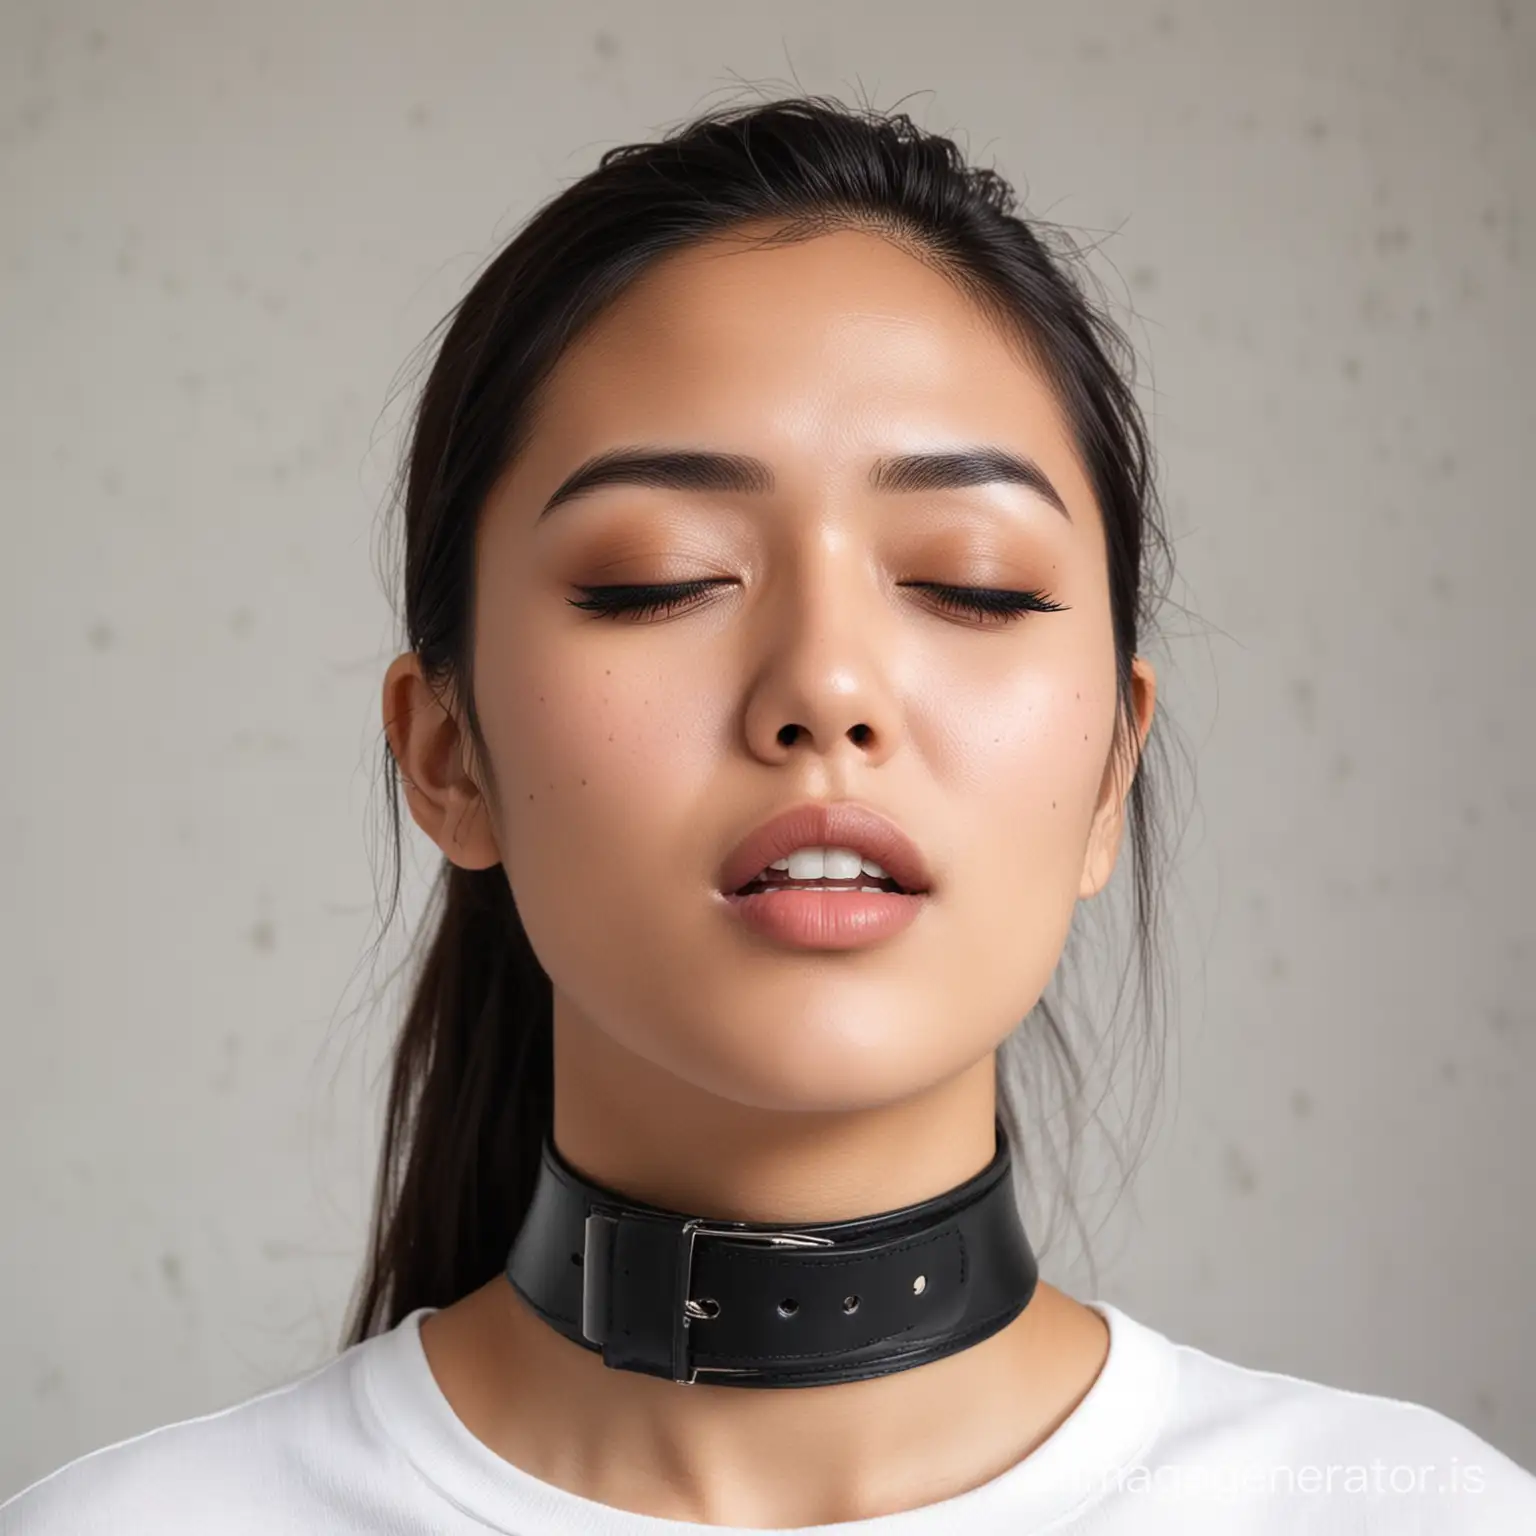 an Indonesian young women, (biting her lower lip while closing her eyes, furrowed his eyebrows, face facing upwards). wearing black tsirt, Choker belt. white Modern Architecture background.